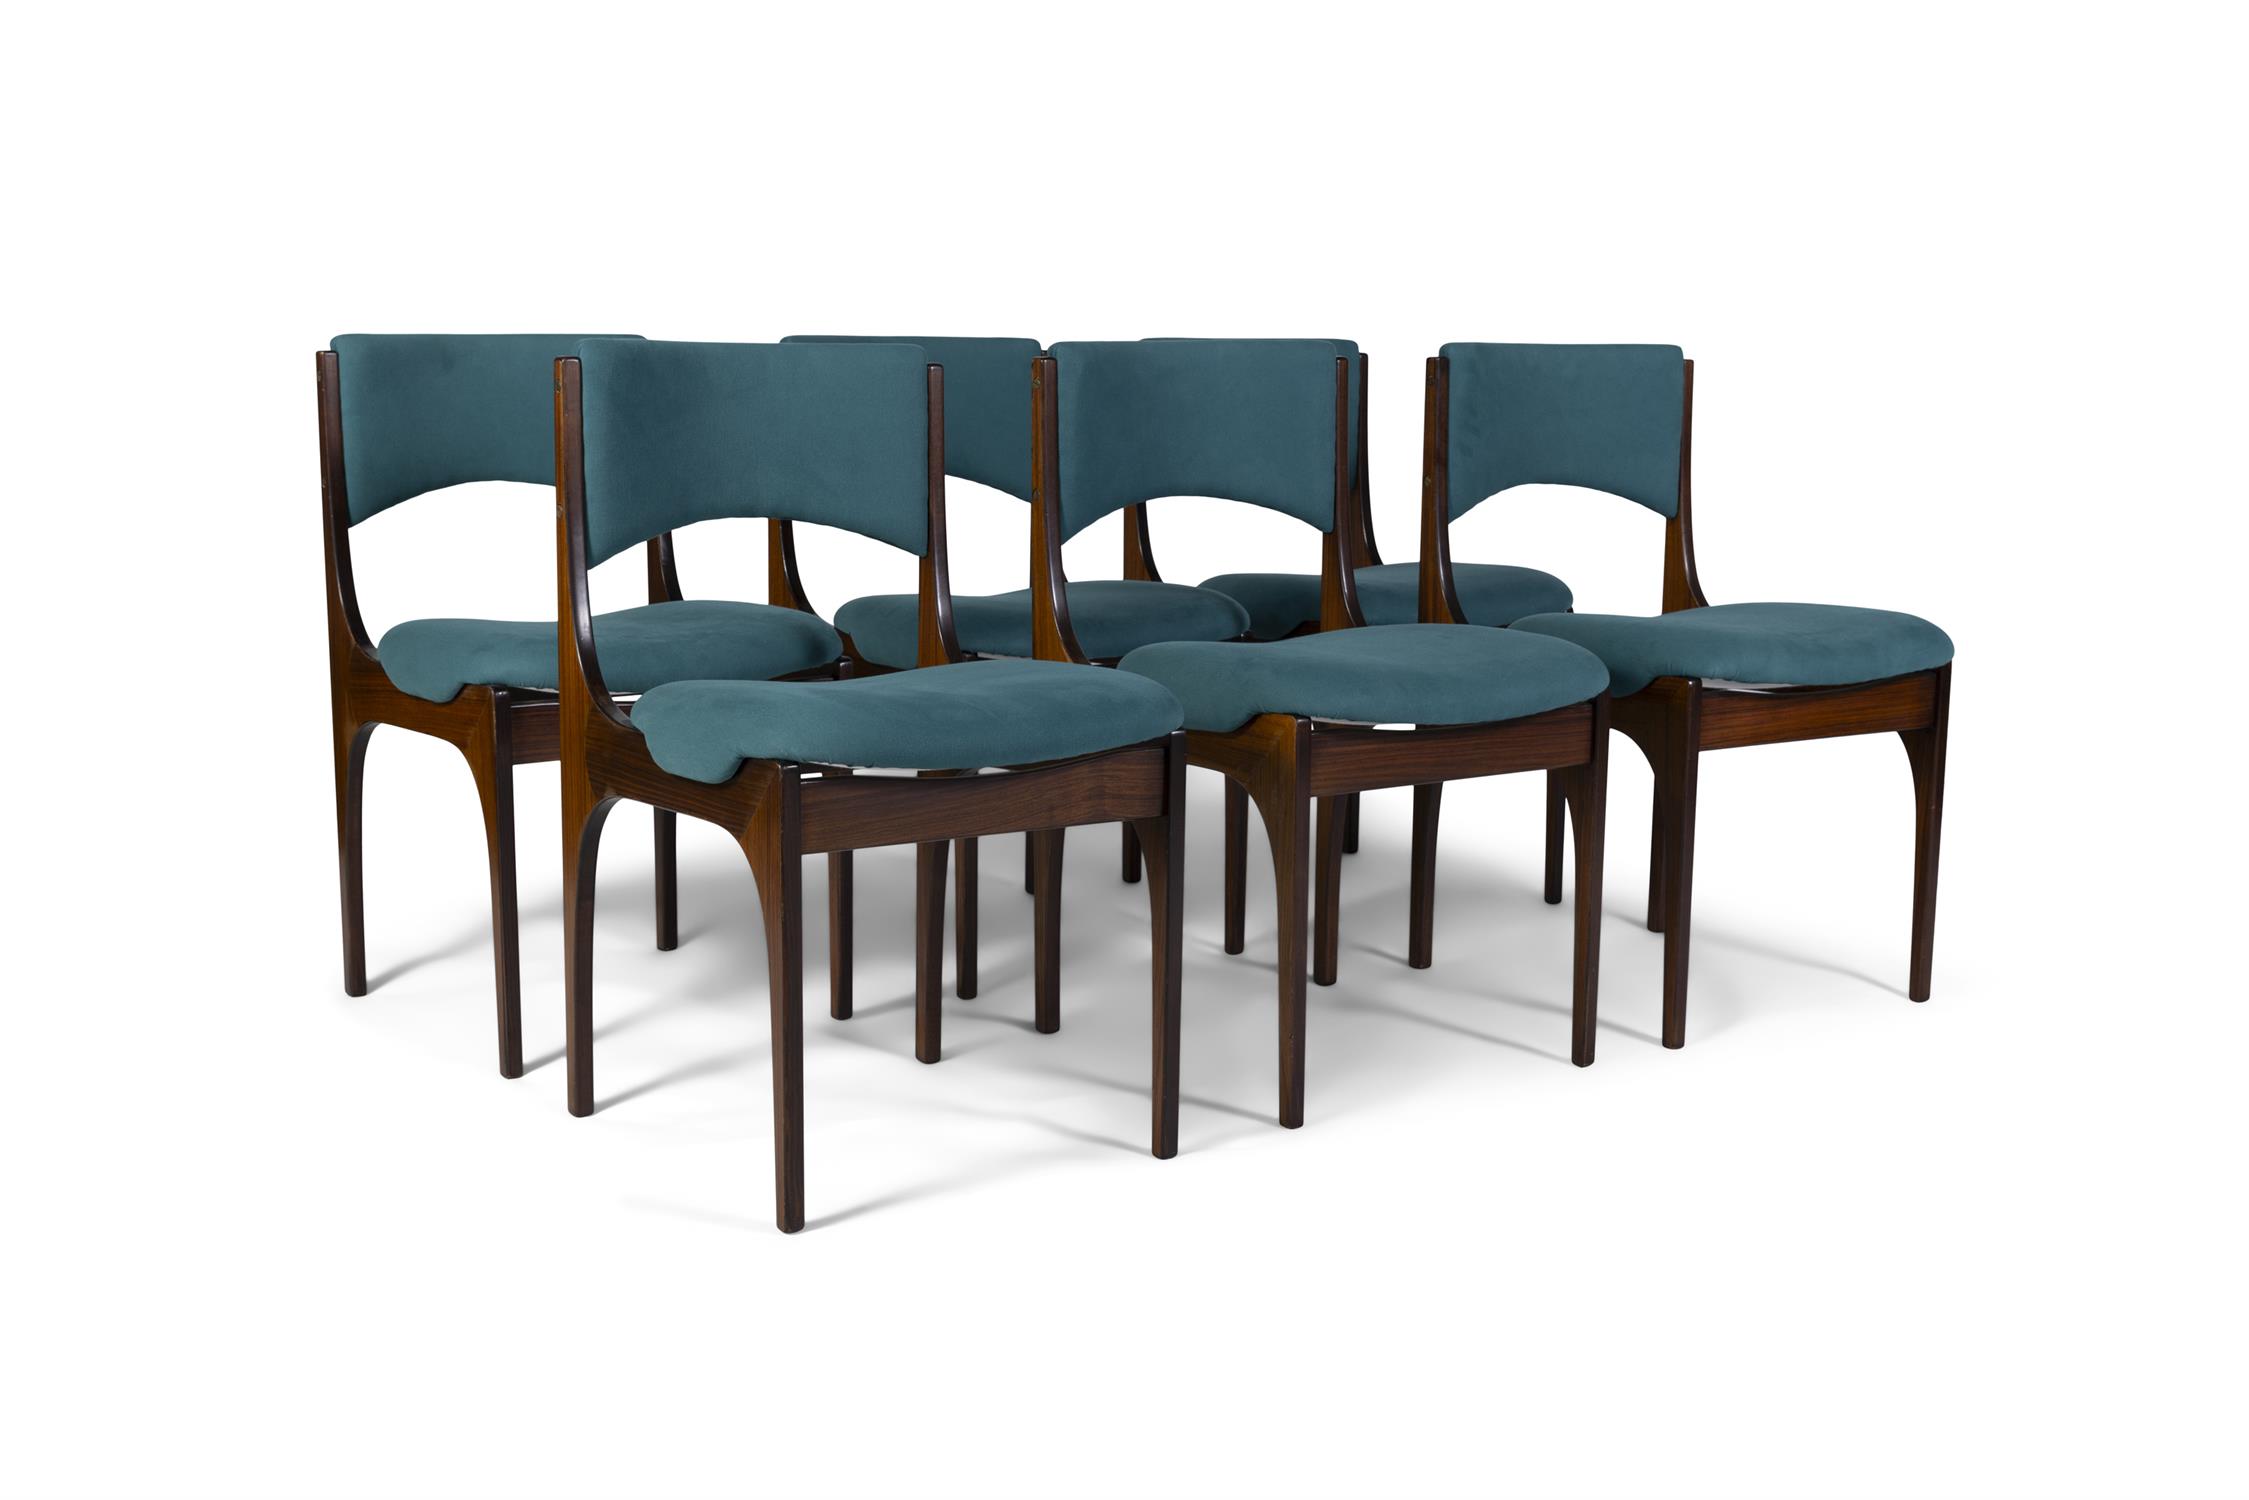 GIUSEPPE GIBELLI A set of six rosewood dining chairs by Giuseppe Gibelli for Sormani. Italy, c. - Image 4 of 7